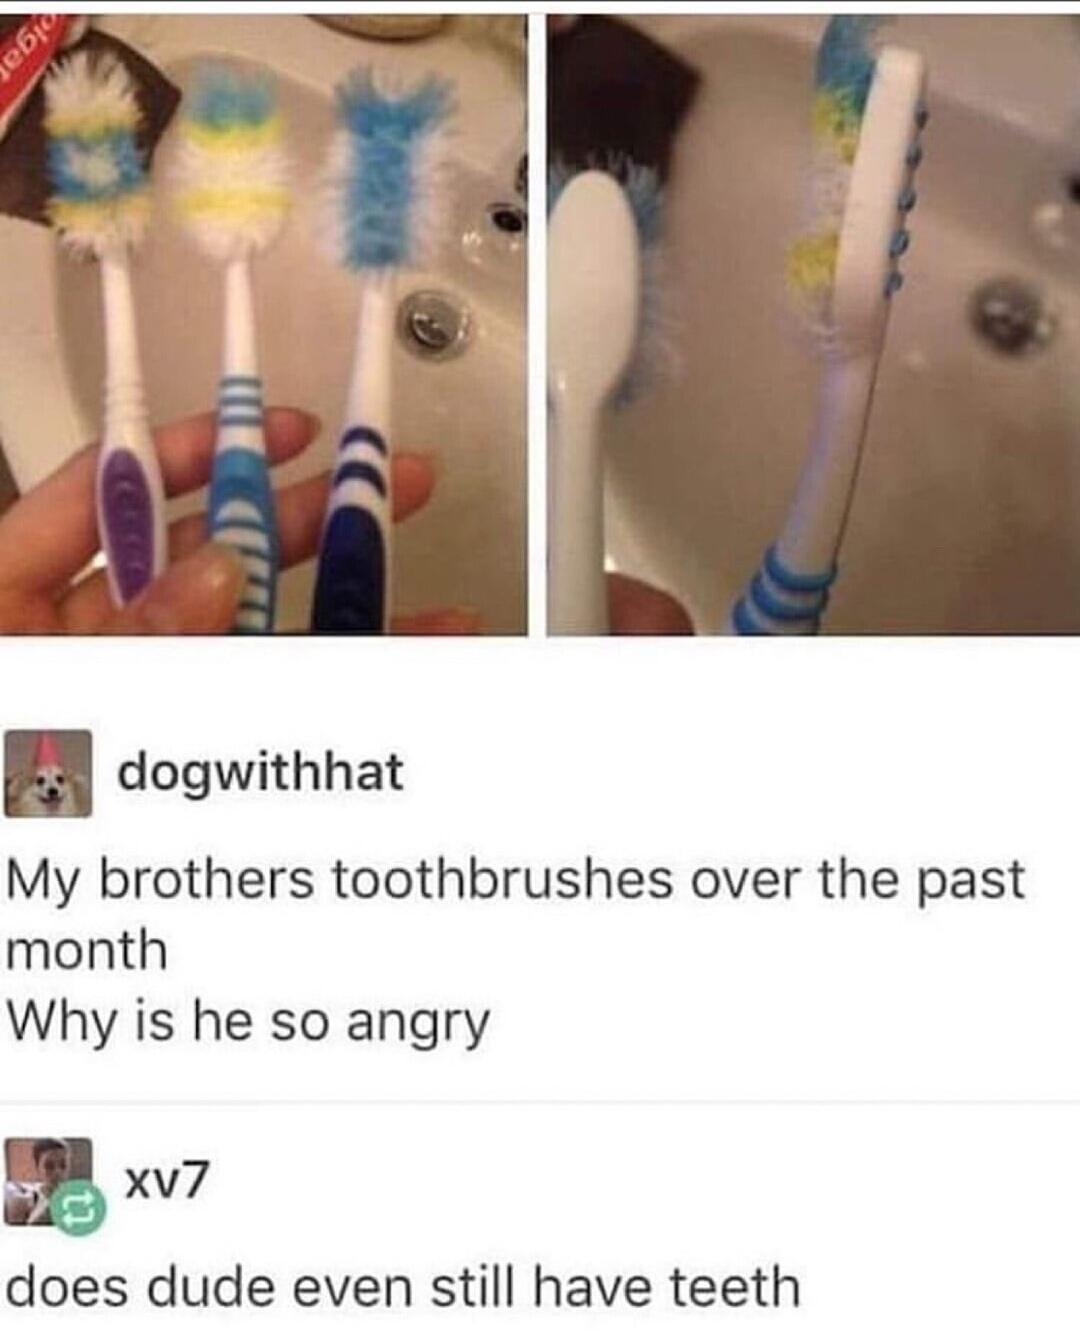 angry toothbrush meme - piga D dogwithhat My brothers toothbrushes over the past month Why is he so angry xyz does dude even still have teeth